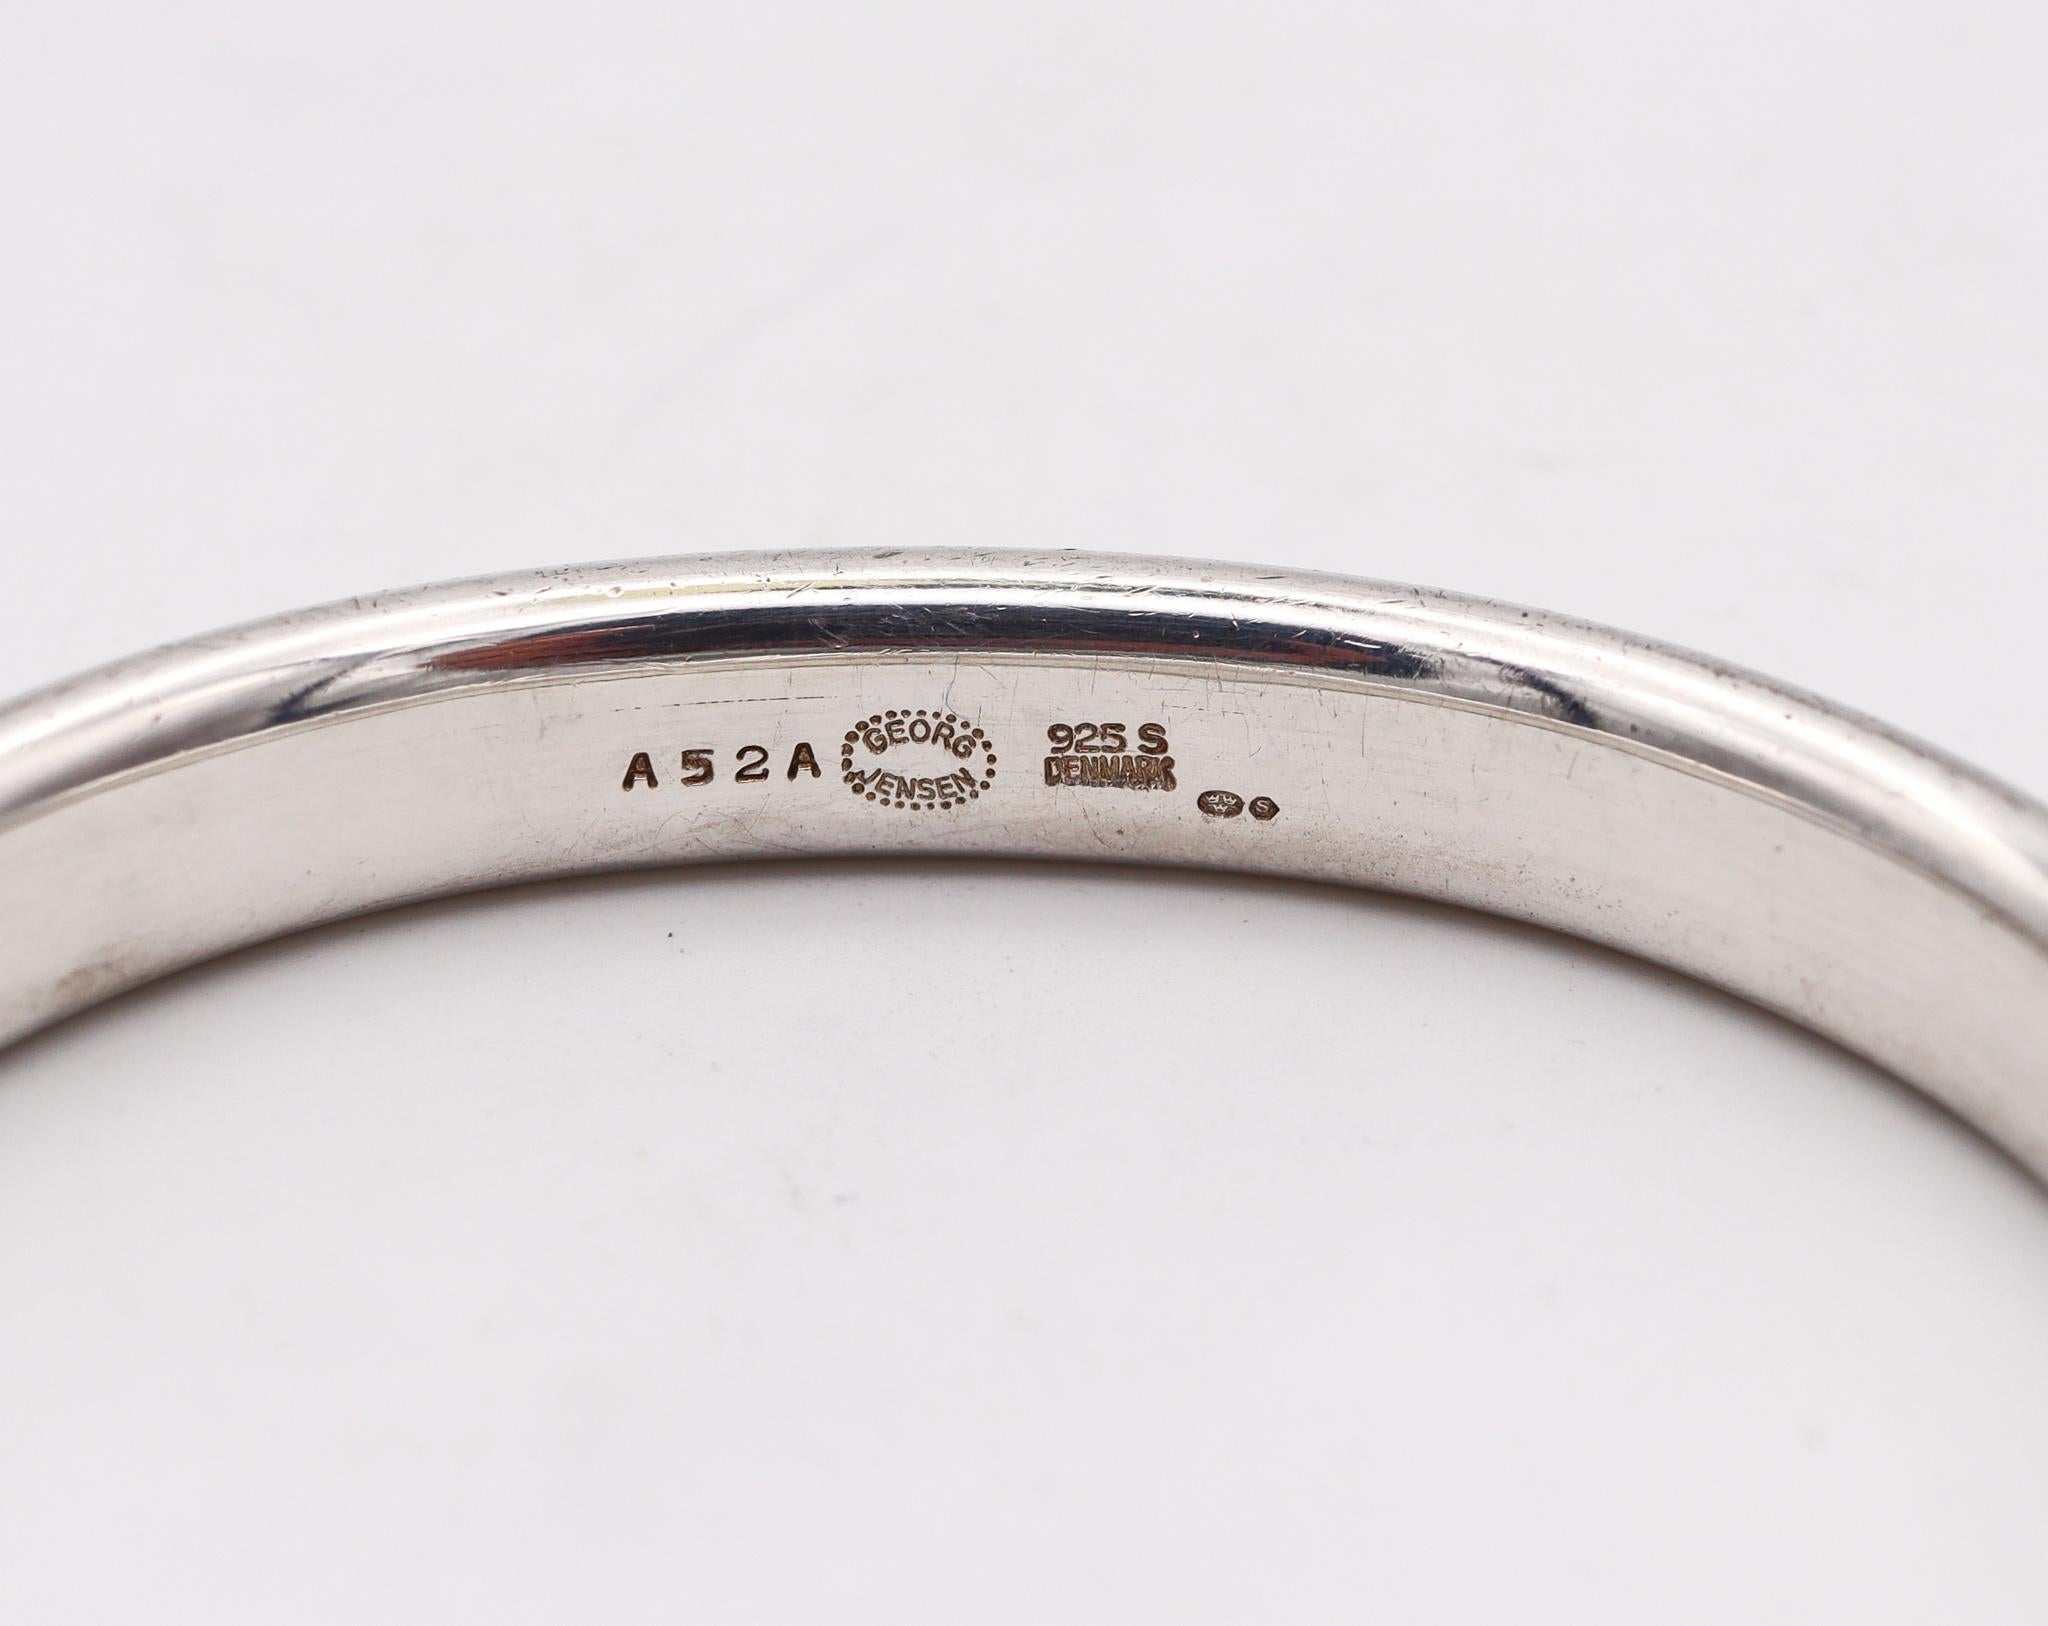 Contemporary Georg Jensen 1990 By Andreas Mikkelsen A52A Solid Bangle In .925 Sterling Silver